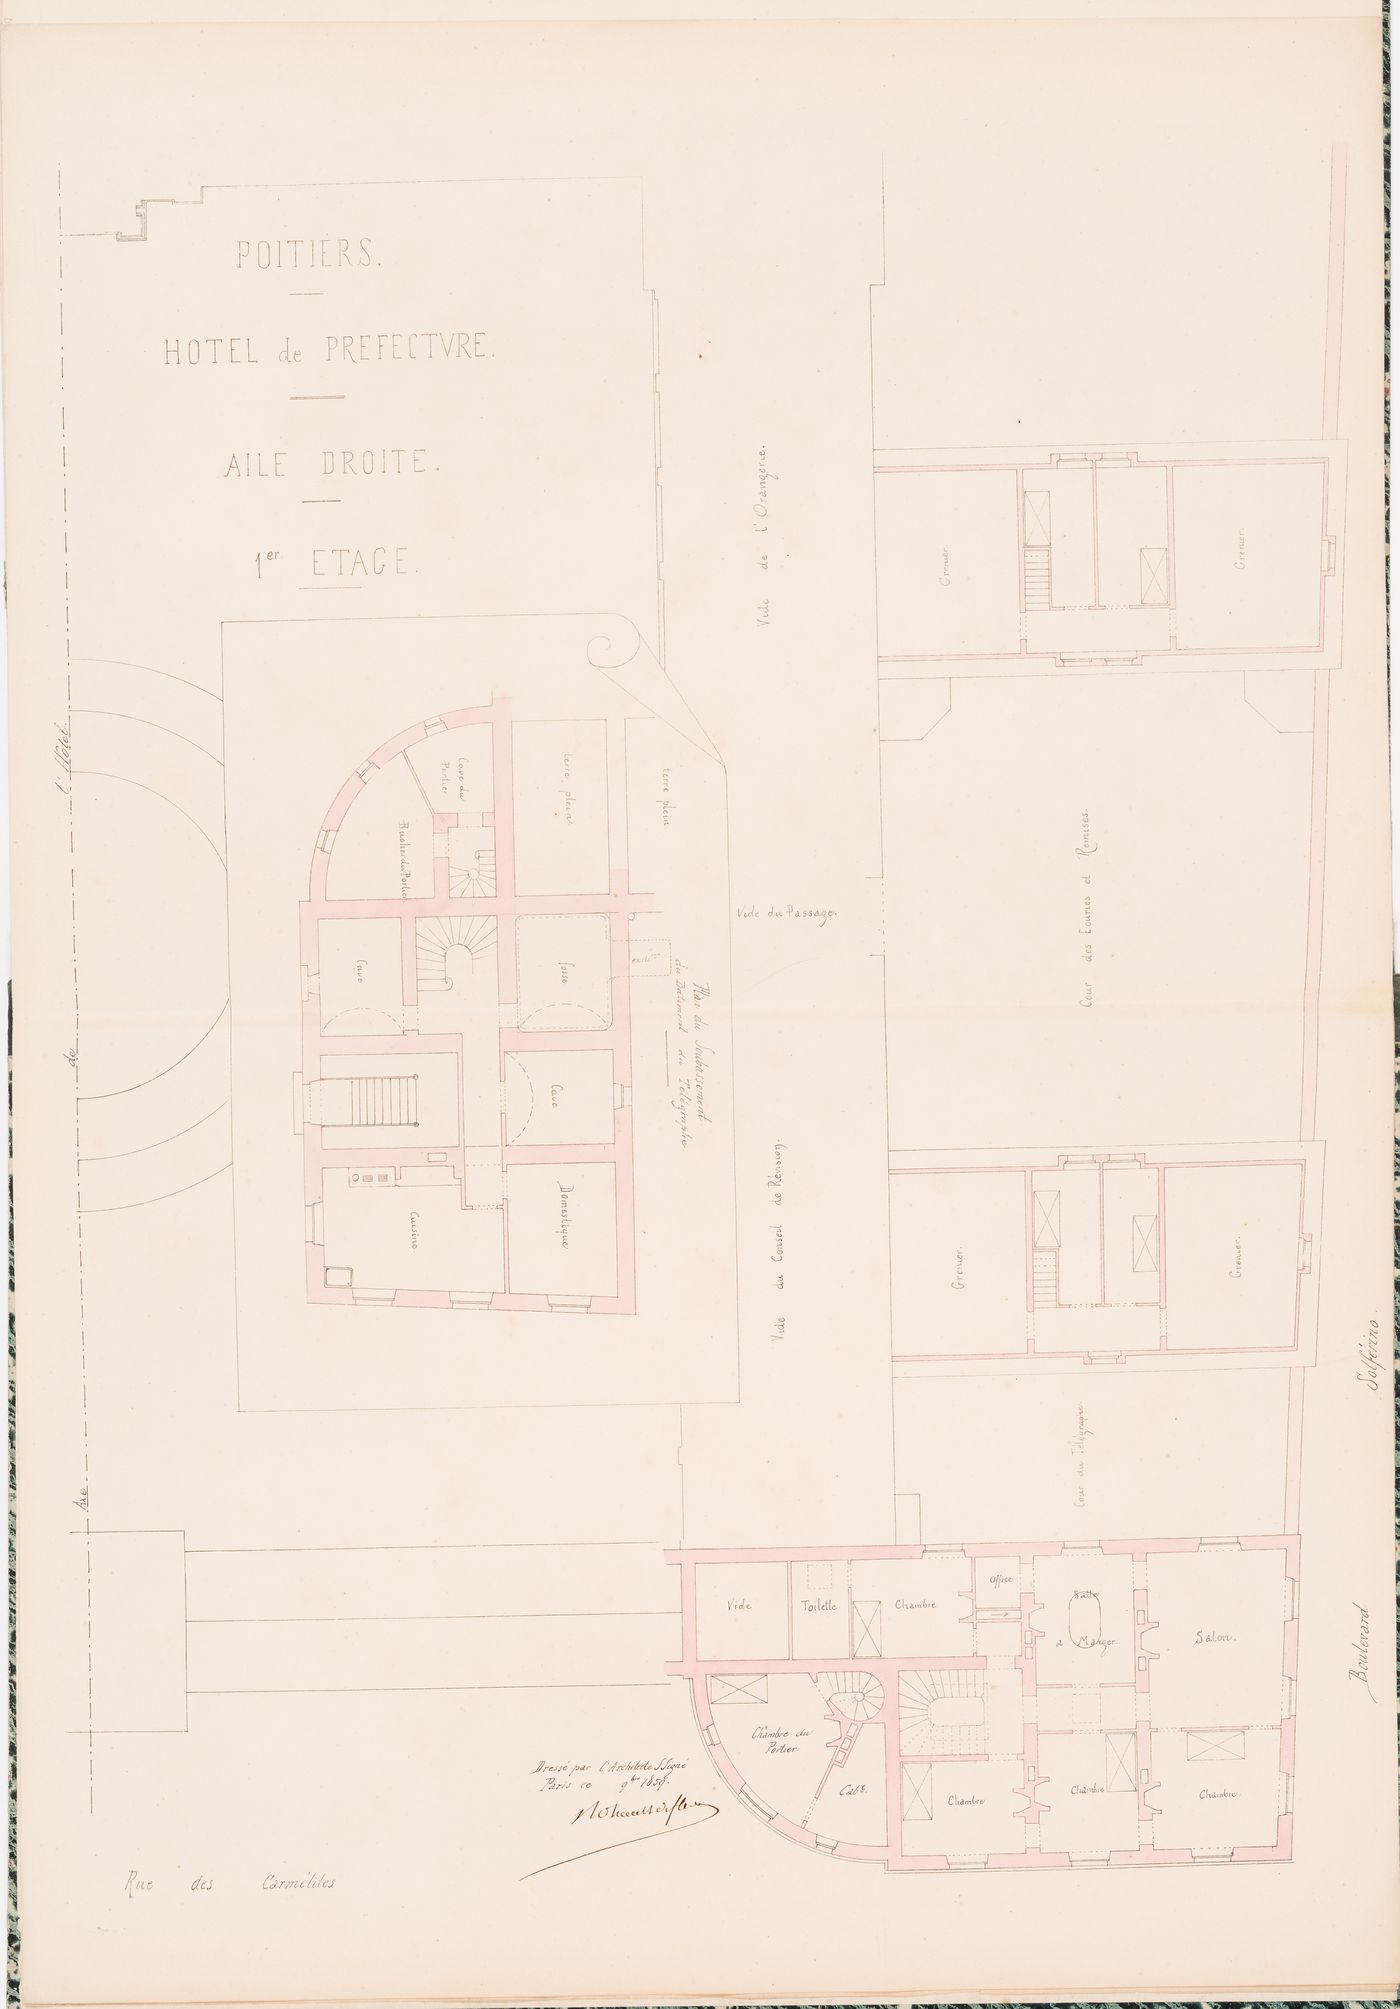 Project for a Hôtel de préfecture, Poitiers: First floor plan for the right wing, including a plan for the "soubassement" for the telegraph building